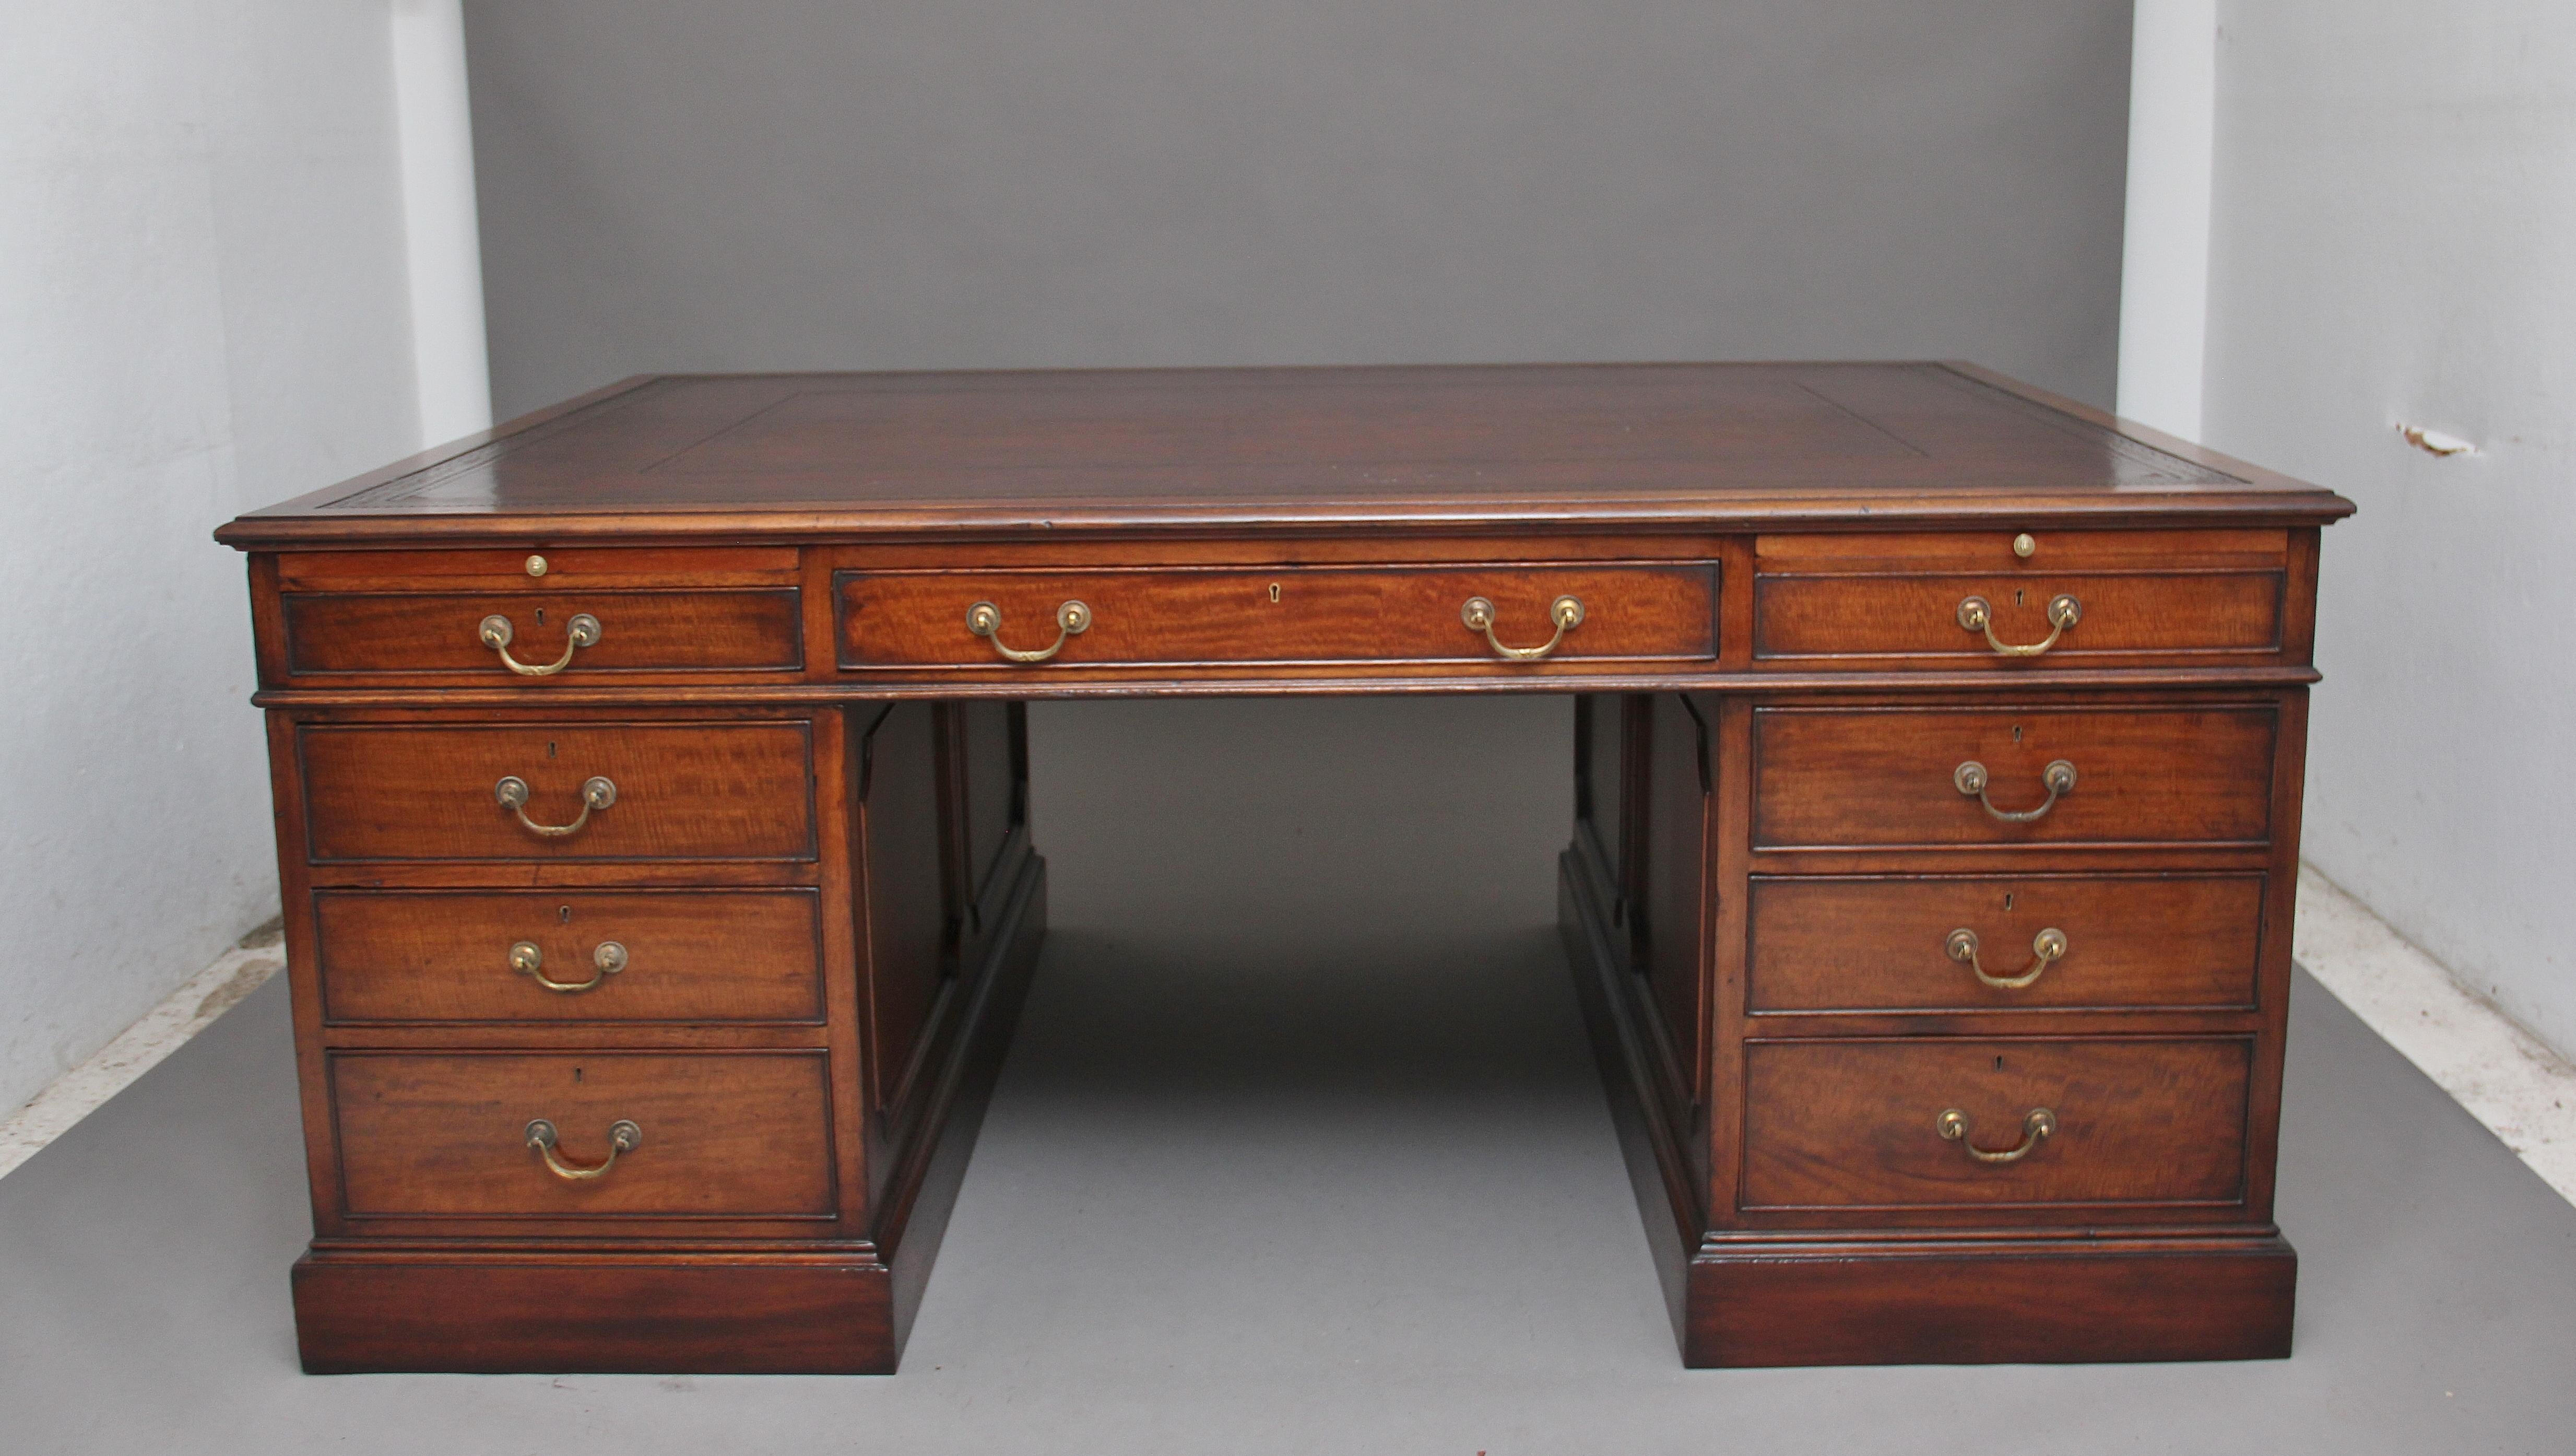 A large early 20th century mahogany twin pedestal partners desk by “White Allom & Company of London”, the moulded edge top having a brown leather writing surface decorated with gold and blind tooling, the front of the desk having an arrangement of